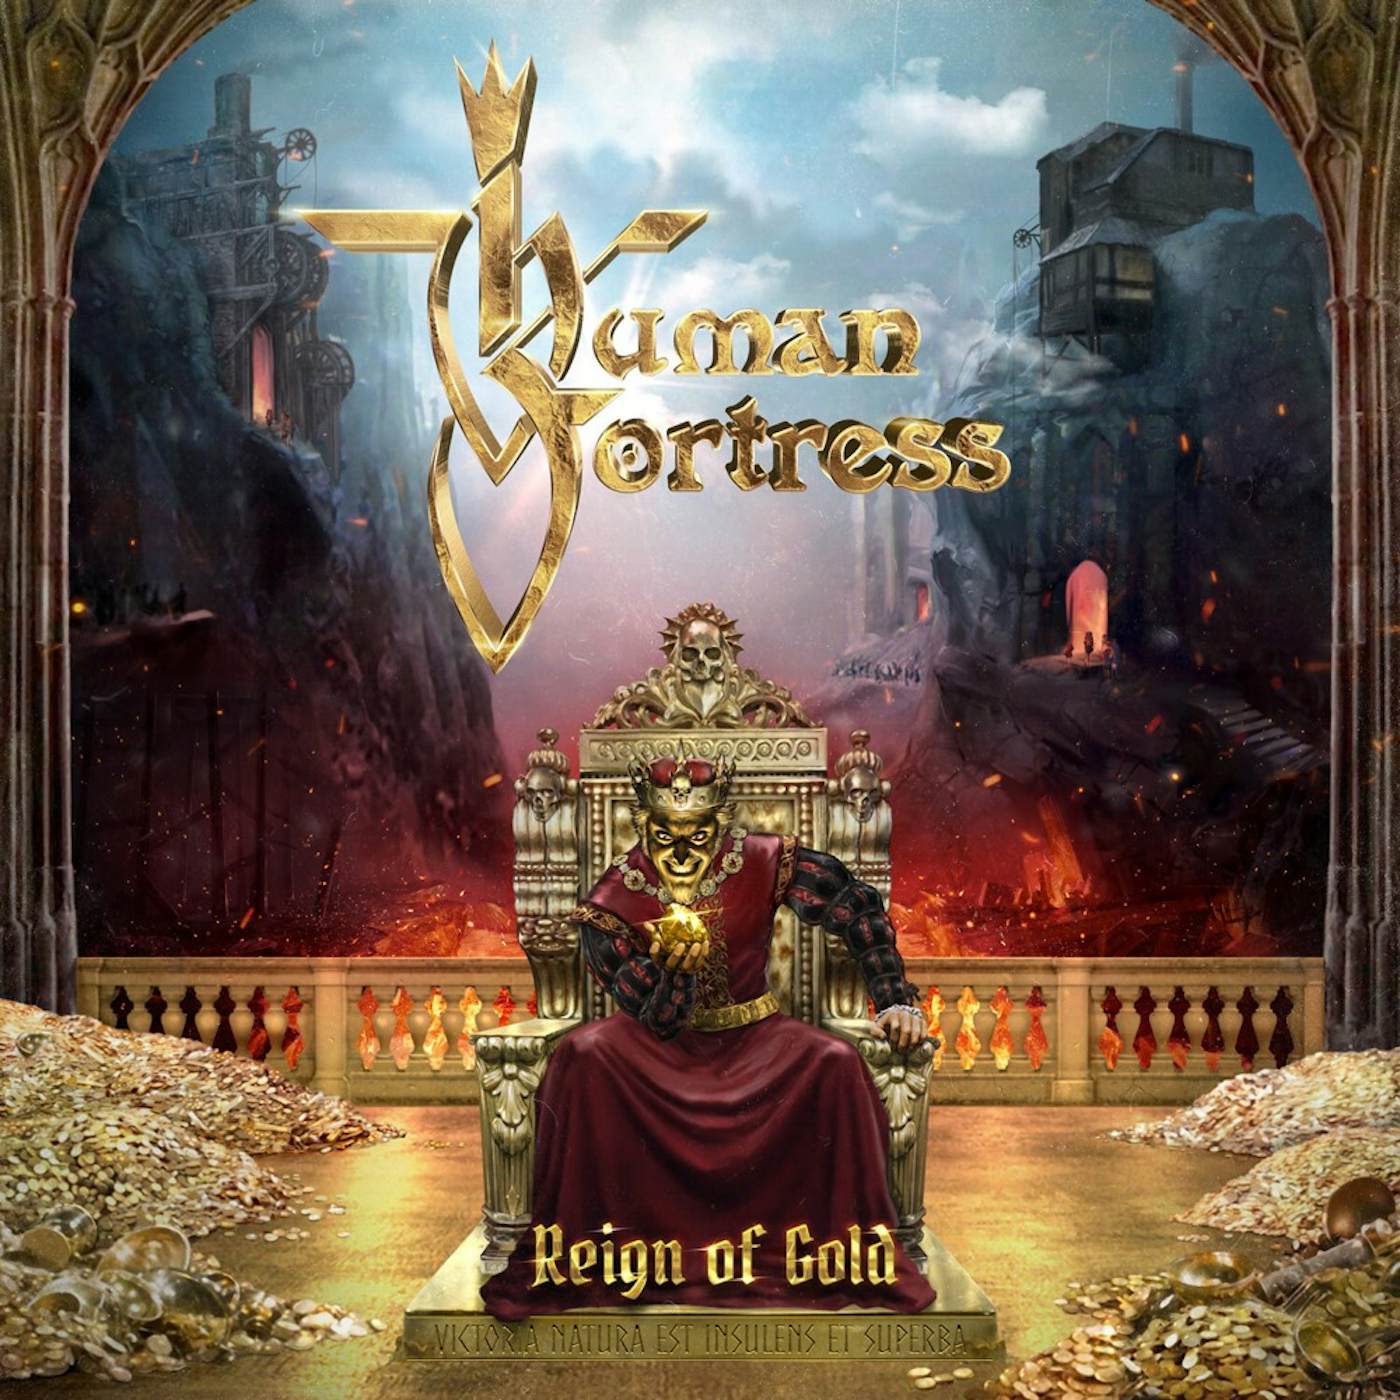 Human Fortress REIGN OF GOLD CD